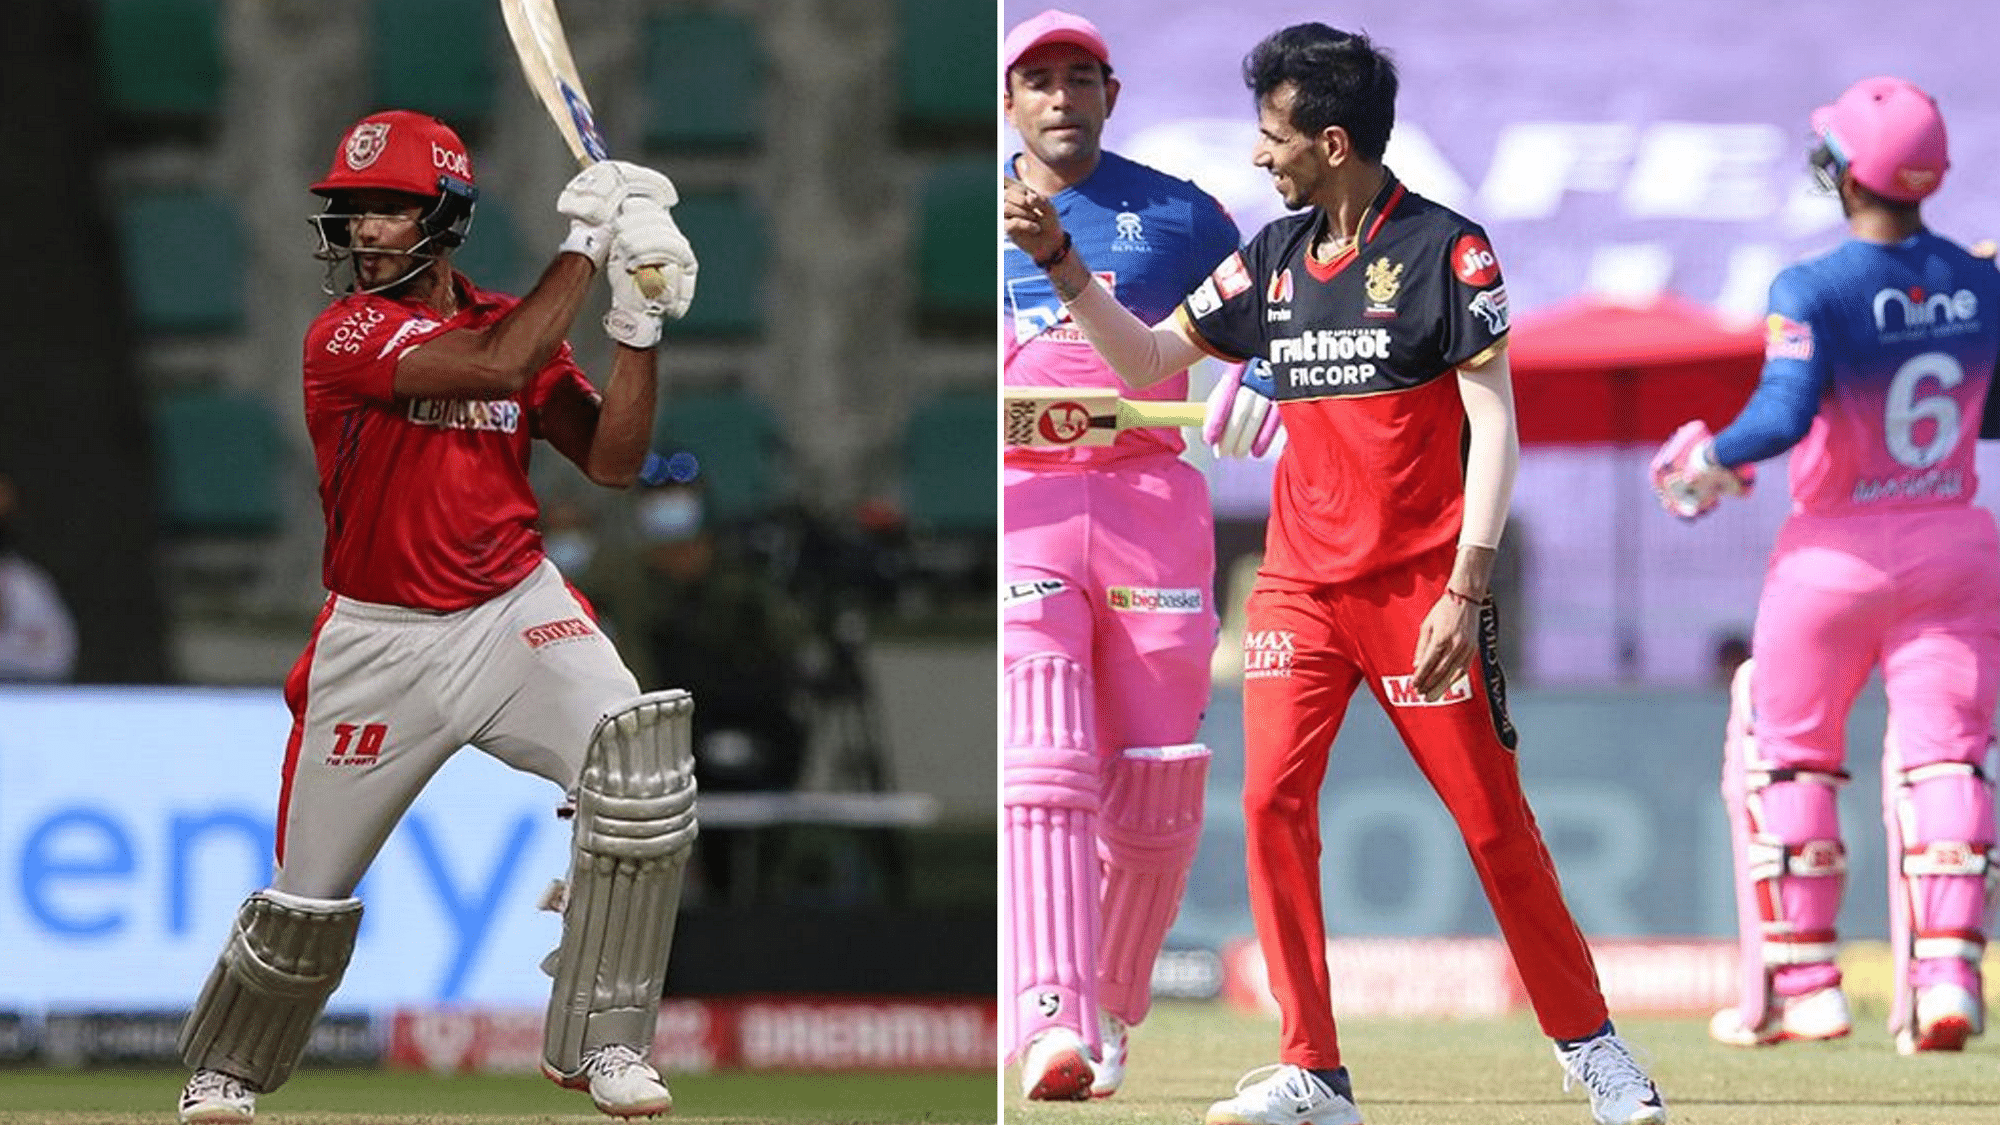 Kings XI Punjab’s Mayank Agarwal hold on to the Orange Cap with 246 runs, while Yuzvendra Chahal now leads the Purple Cap race